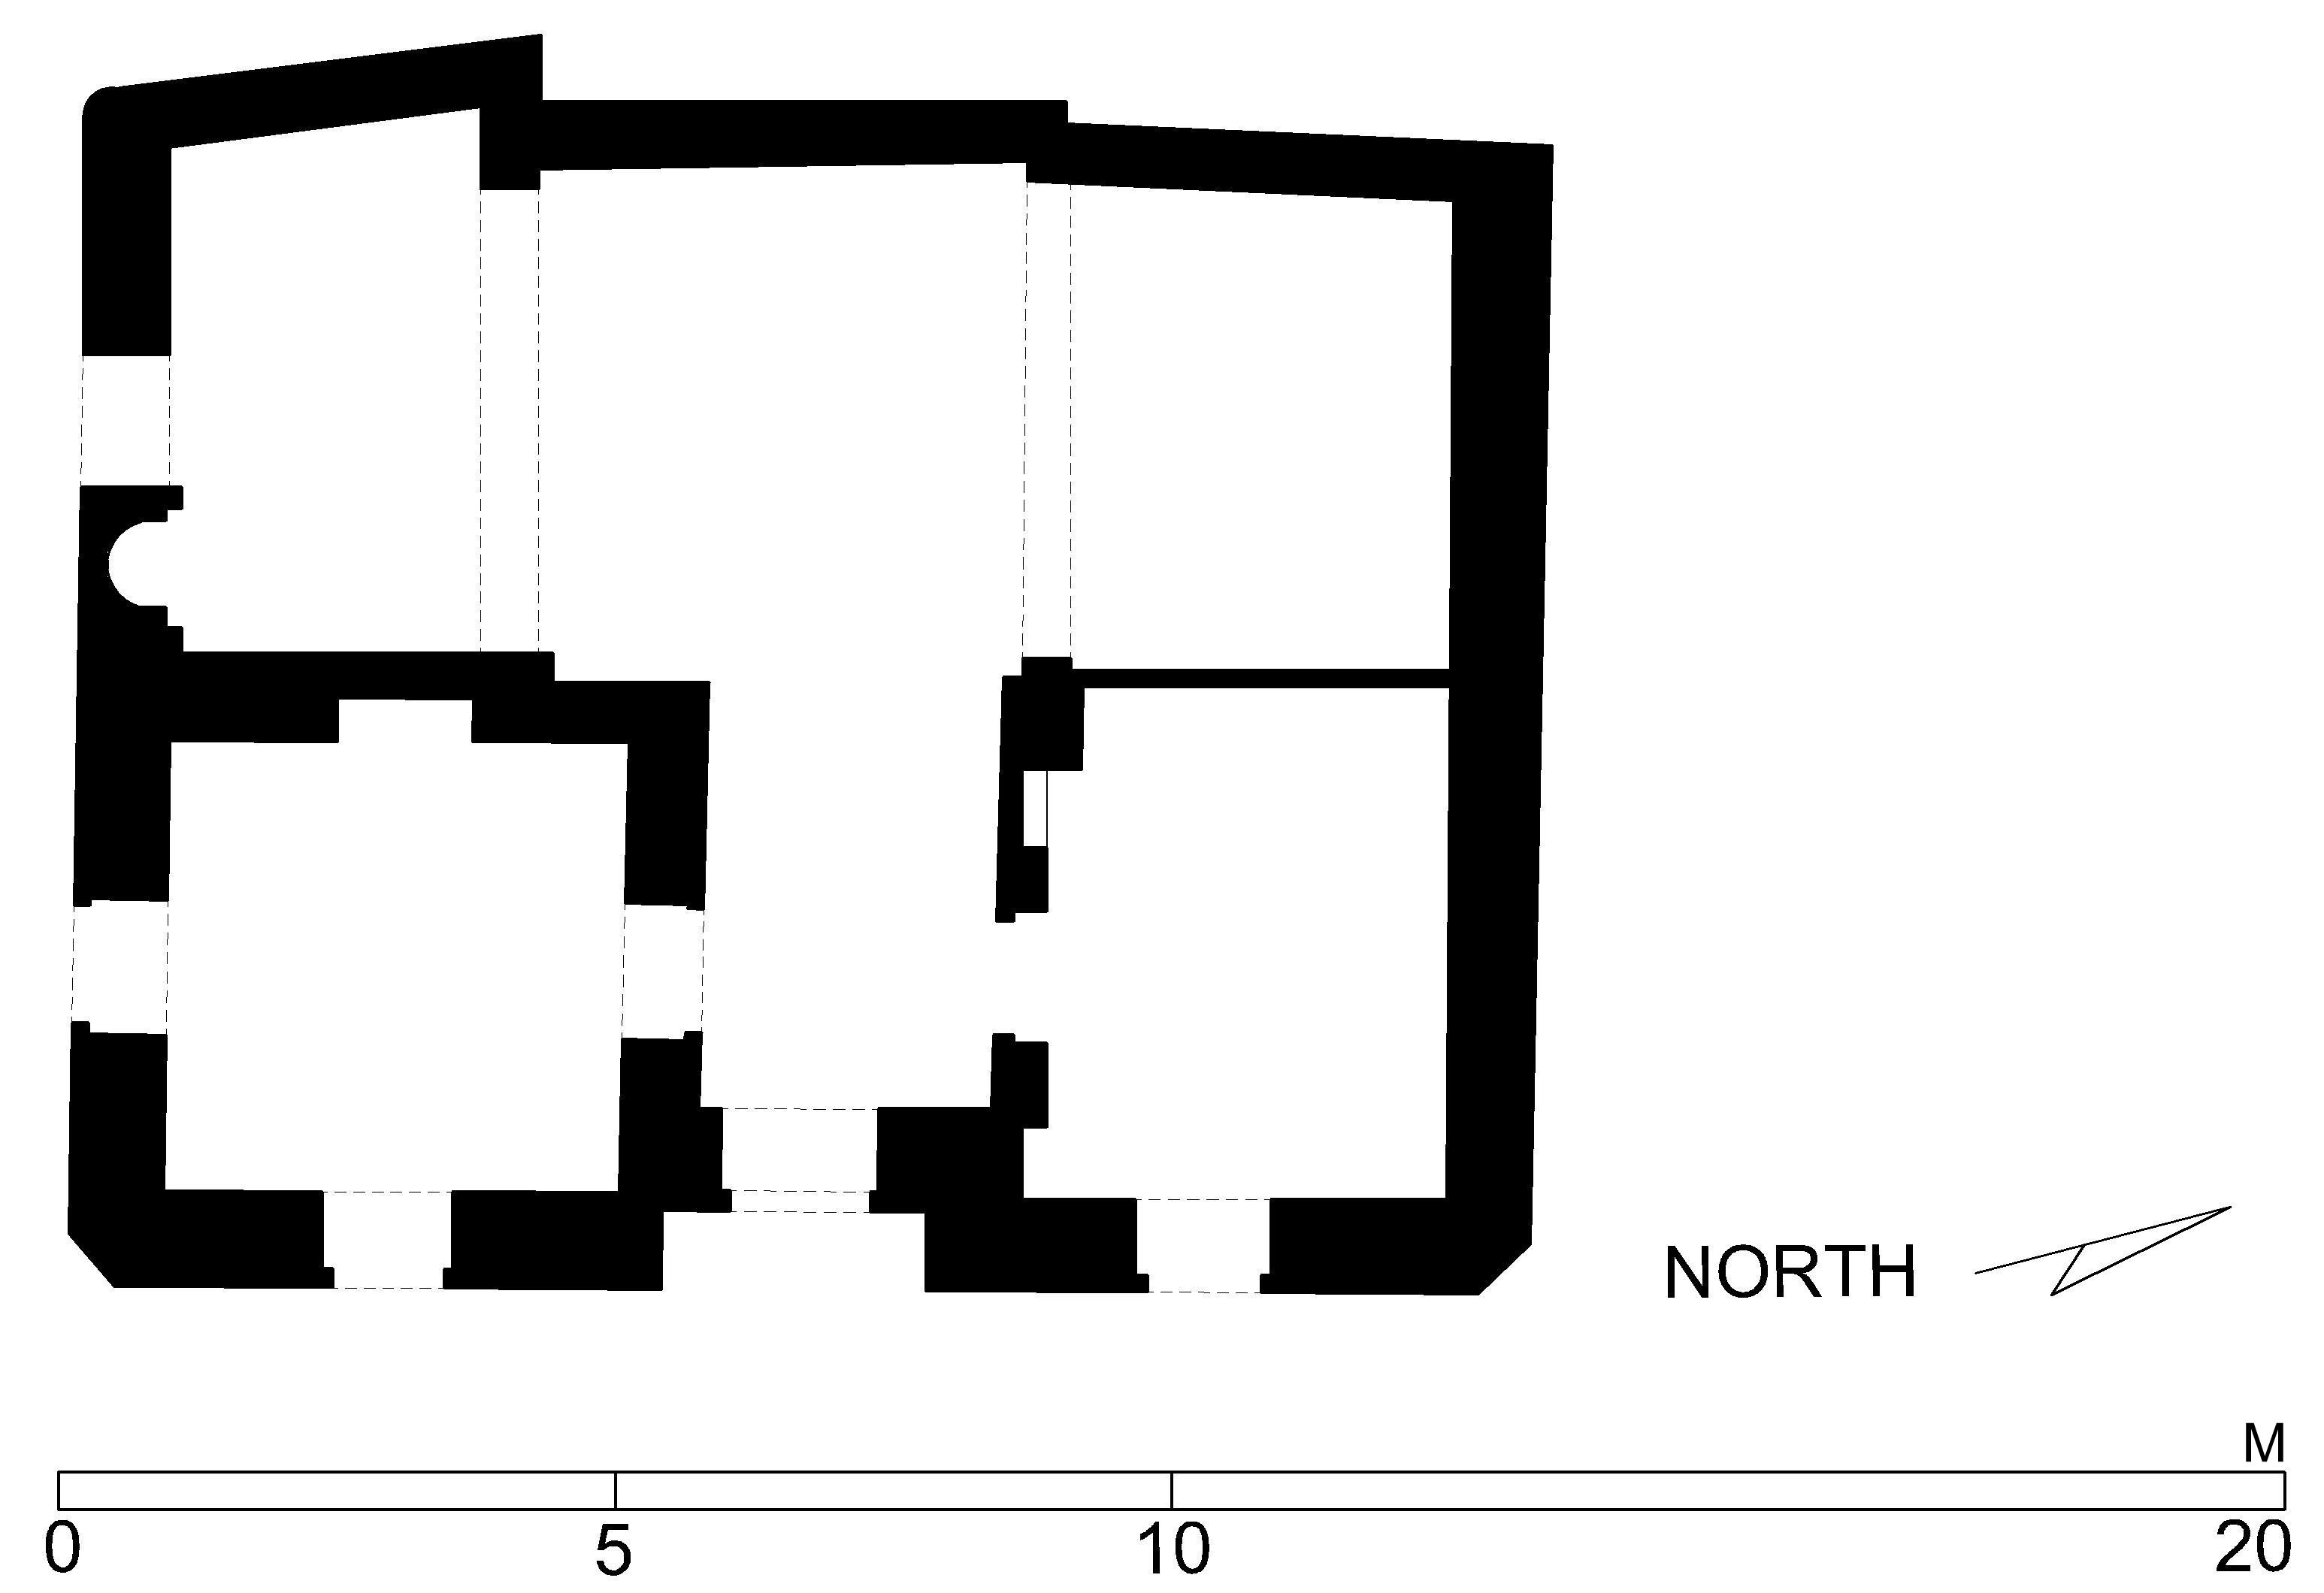 Turba Araq ibn 'Abd Allah al-Silahdar - Floor plan of mausoleum (after Meinecke) in AutoCAD 2000 format. Click the download button to download a zipped file containing the .dwg file. 